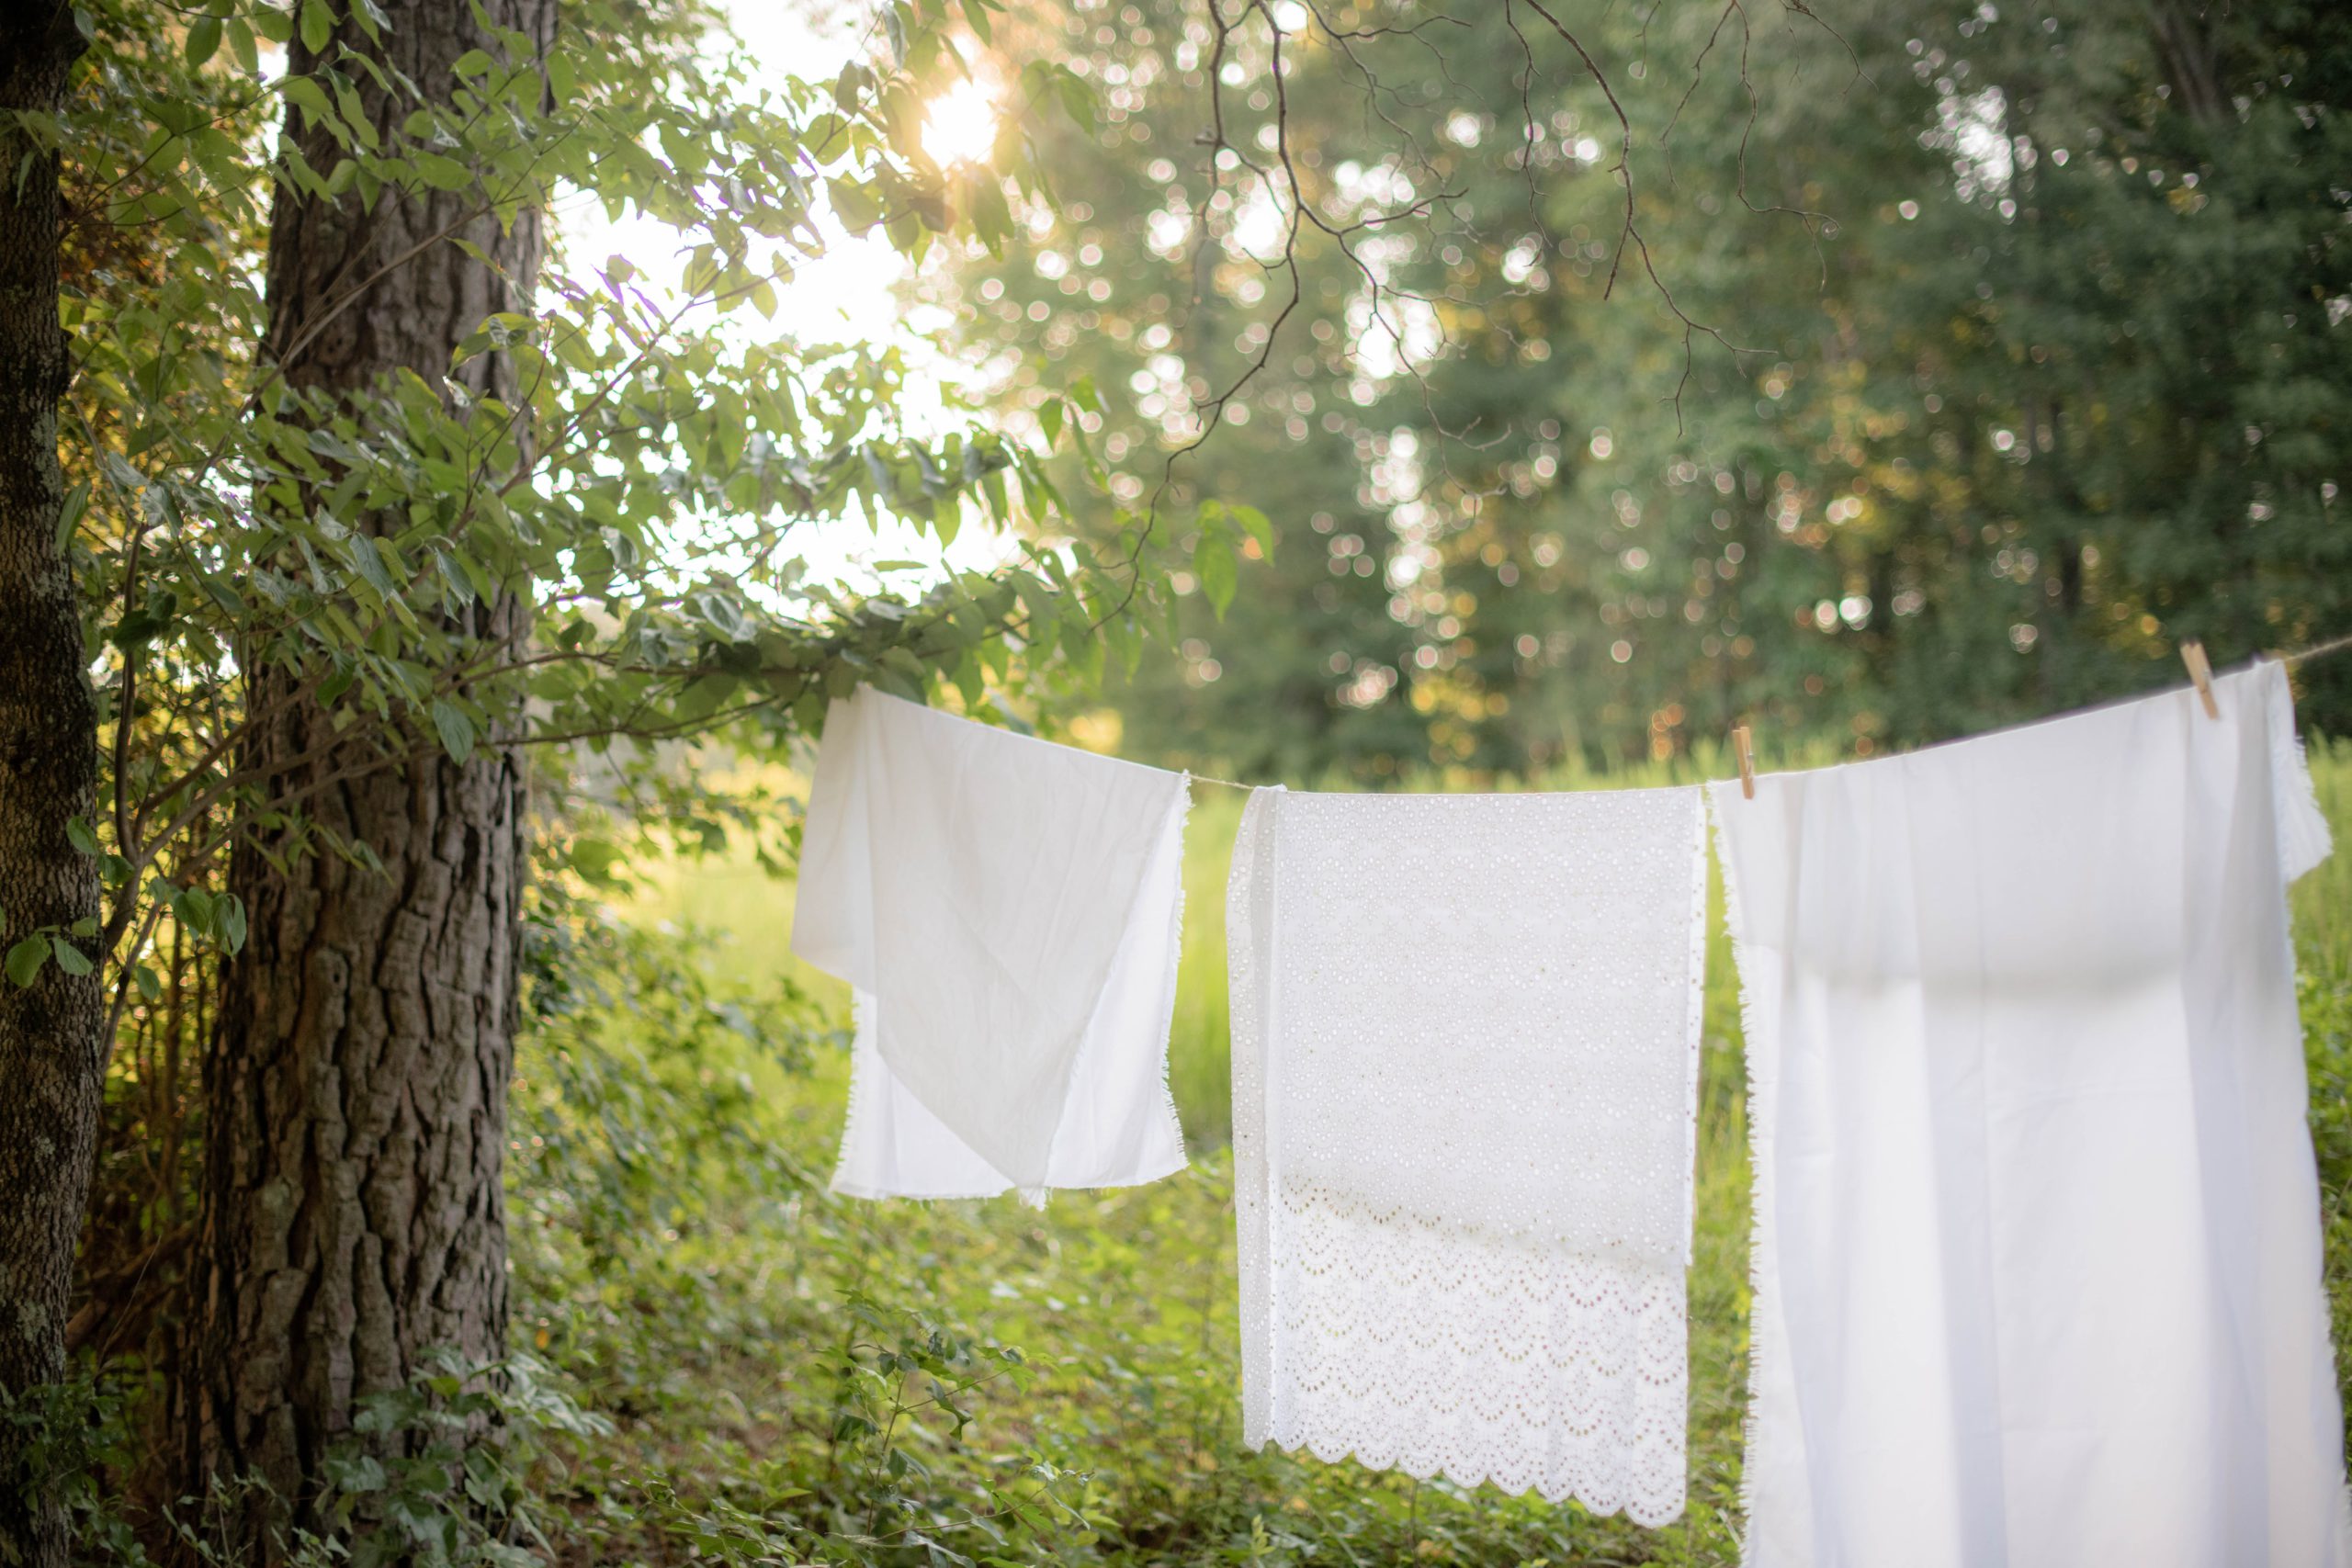 Clothesline Act aims to bring outdoor clothes drying for all - My